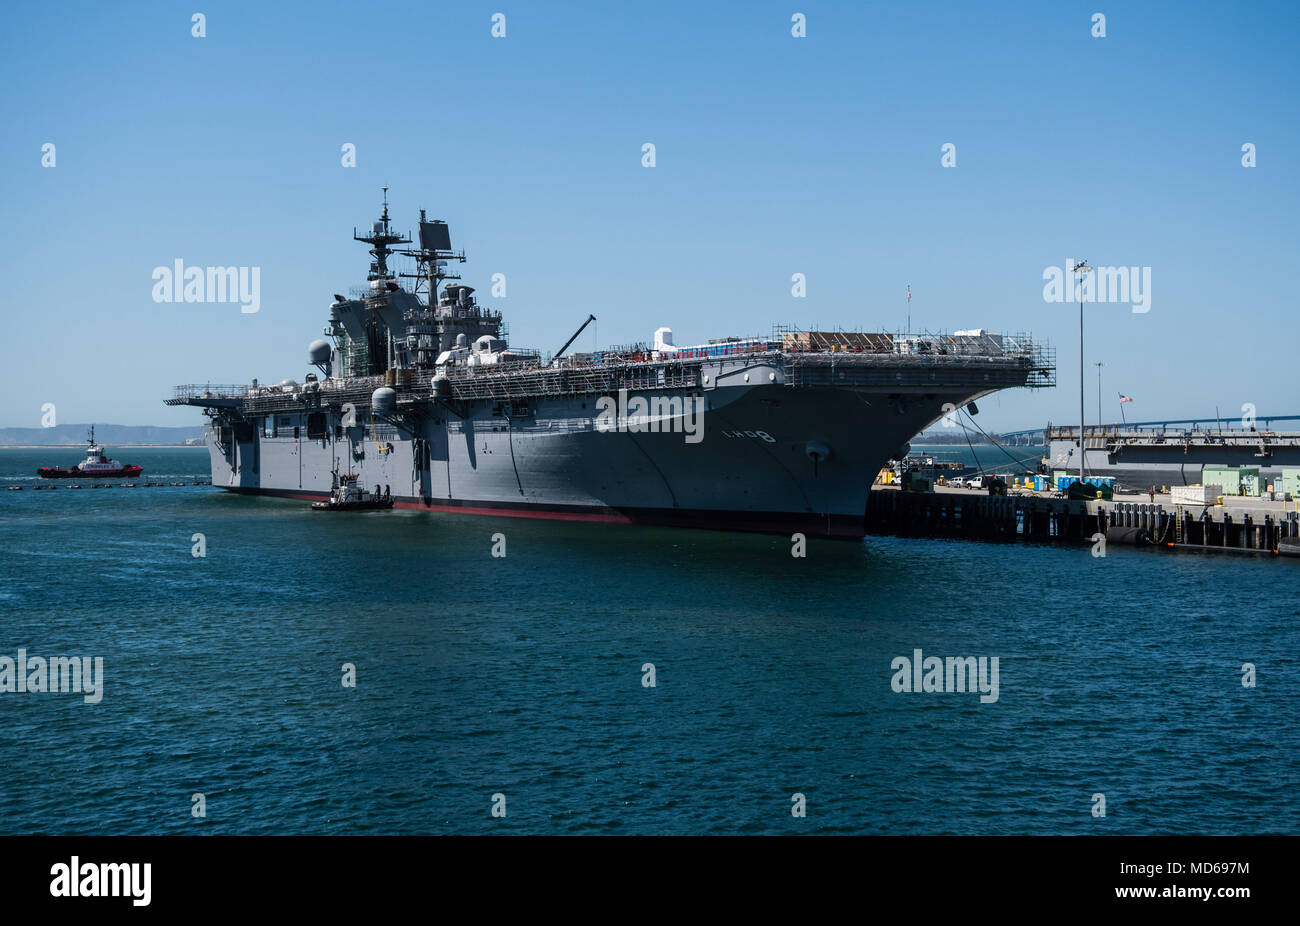 180327-N-LI768-1264 SAN DIEGO (March 27, 2018) The amphibious assault ship USS Makin Island (LHD 8) rests pier-side at Naval Base San Diego following a seven-month dry dock period at General Dynamics National Steel and Shipbuilding Company (NASSCO). Makin Island, home-ported in San Diego, is conducting a depot-level maintenance availability. (U.S. Navy photo by Mass Communication Specialist 2nd Class Devin M. Langer) Stock Photo